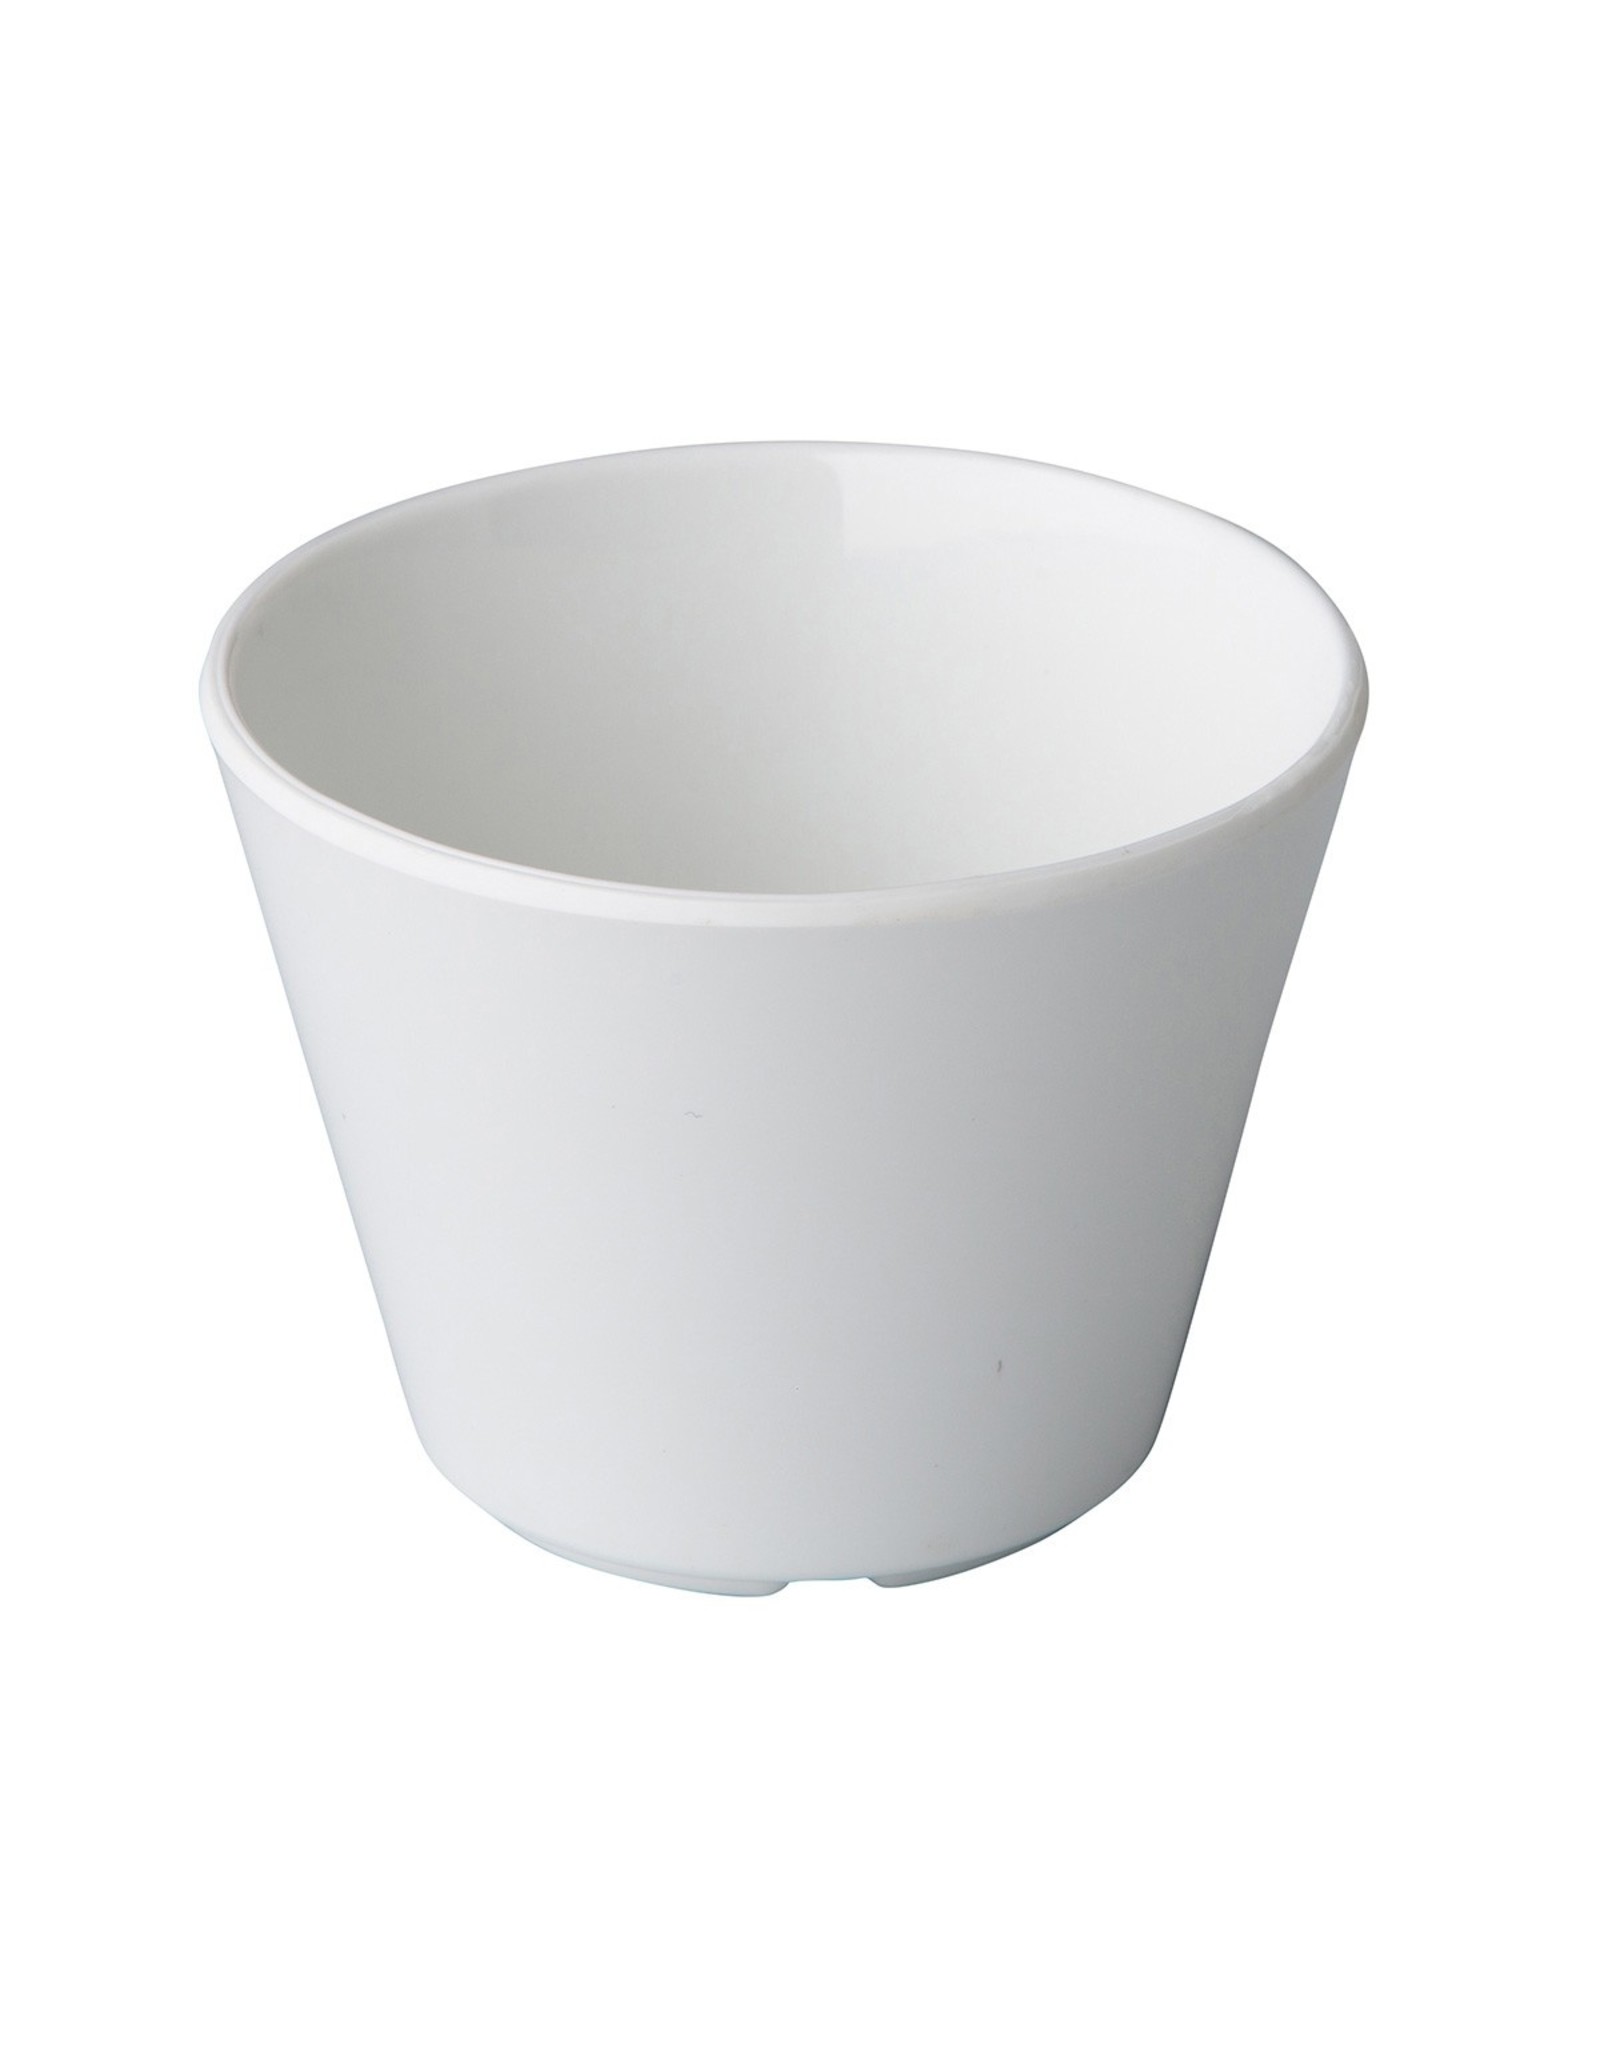 Stylepoint Conic sauce bowl 8 x 6 cm